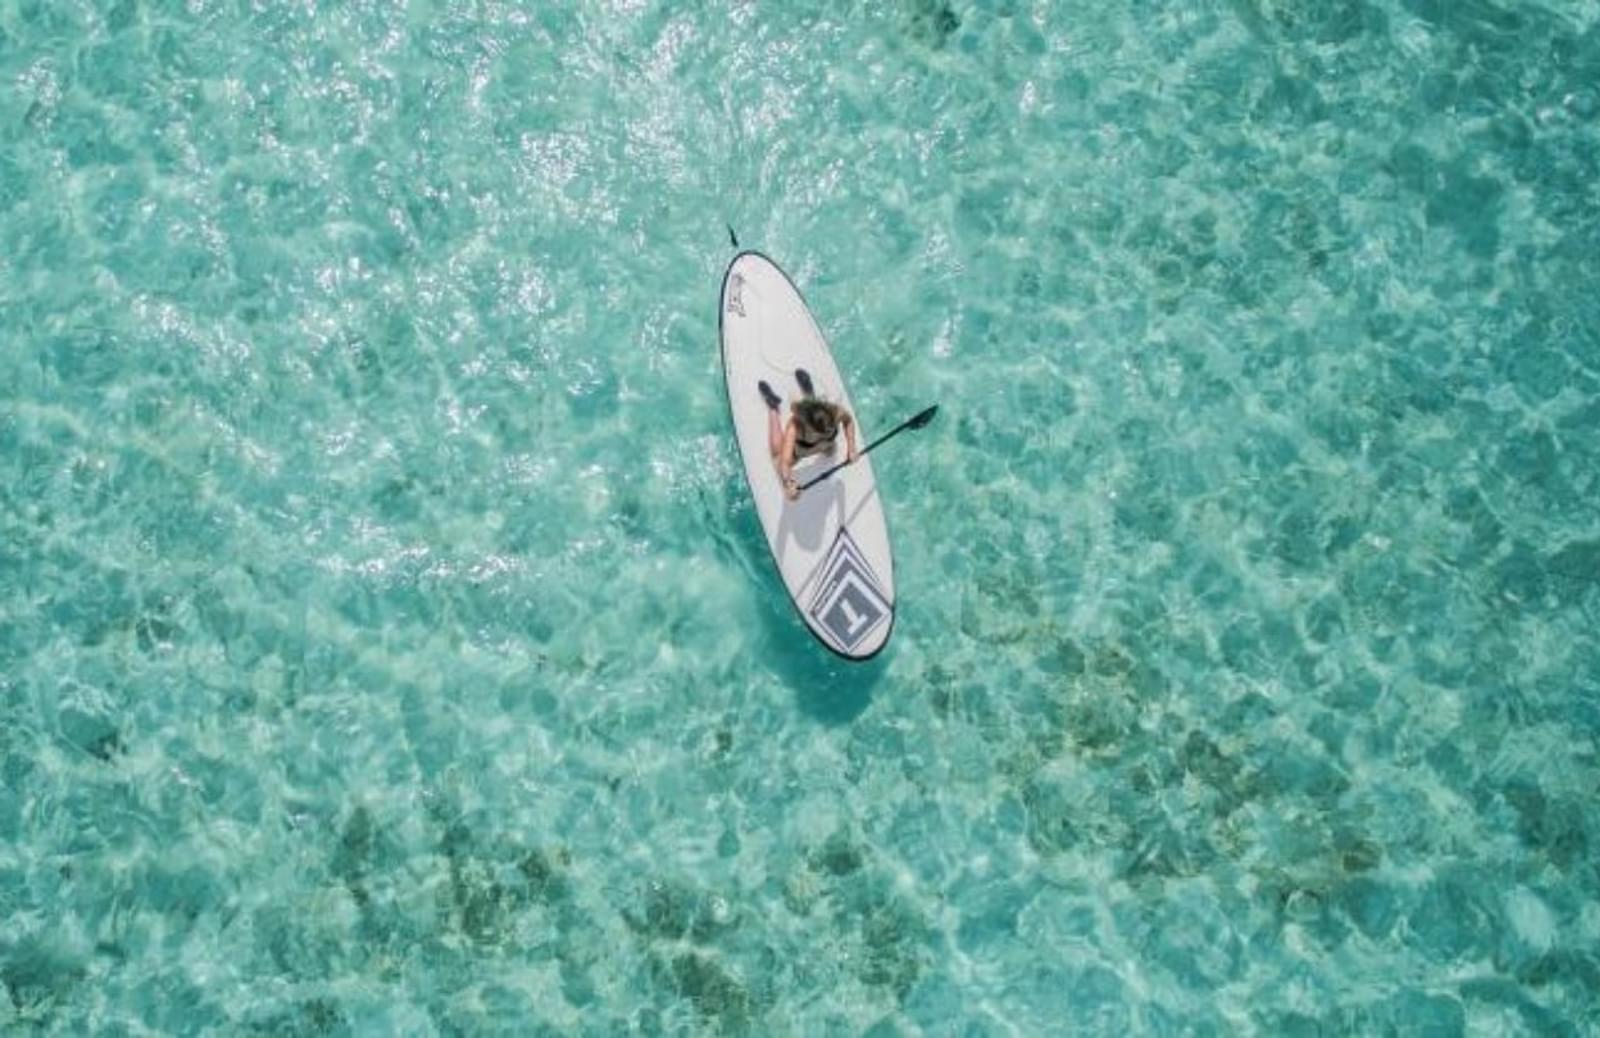 Aerial image of person on paddleboard in turquoise water